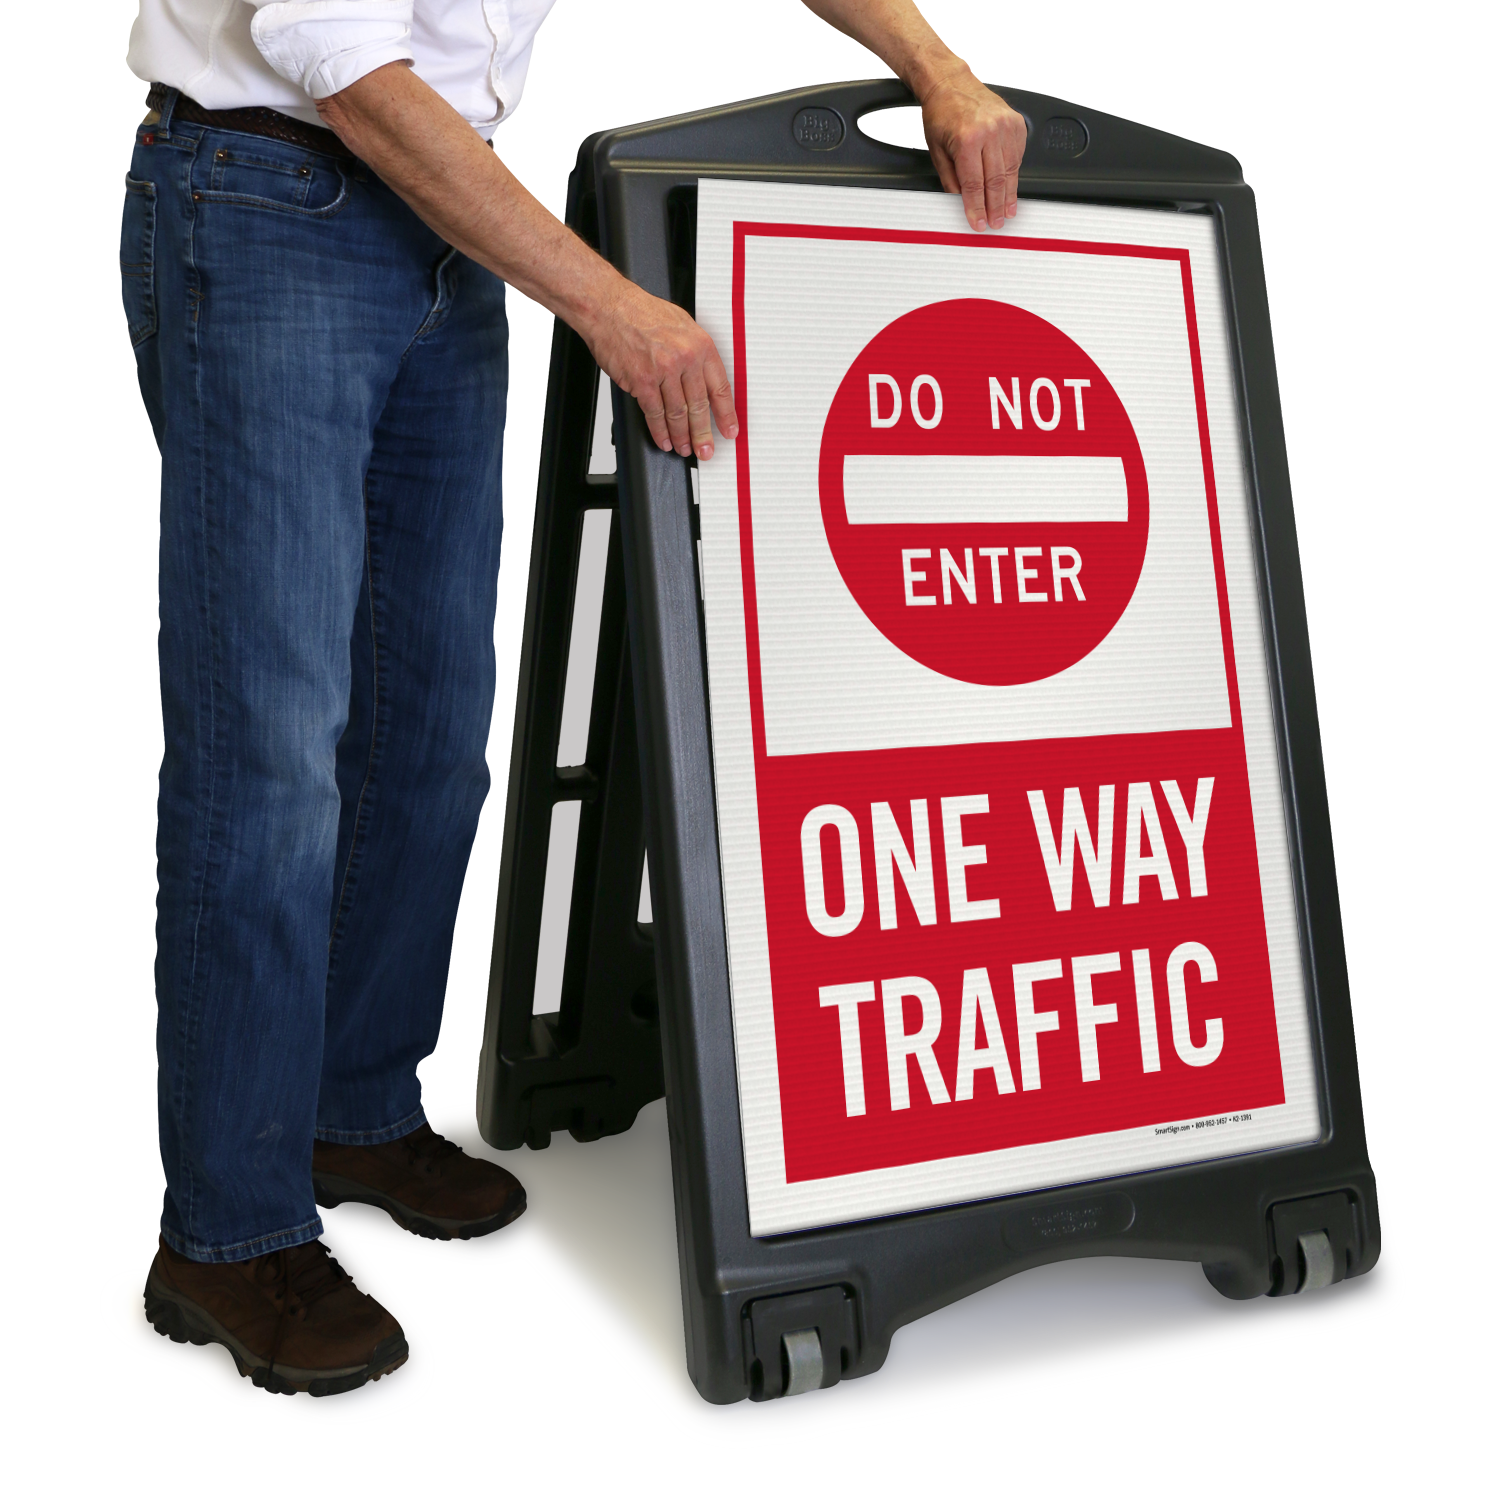 one way traffic sign